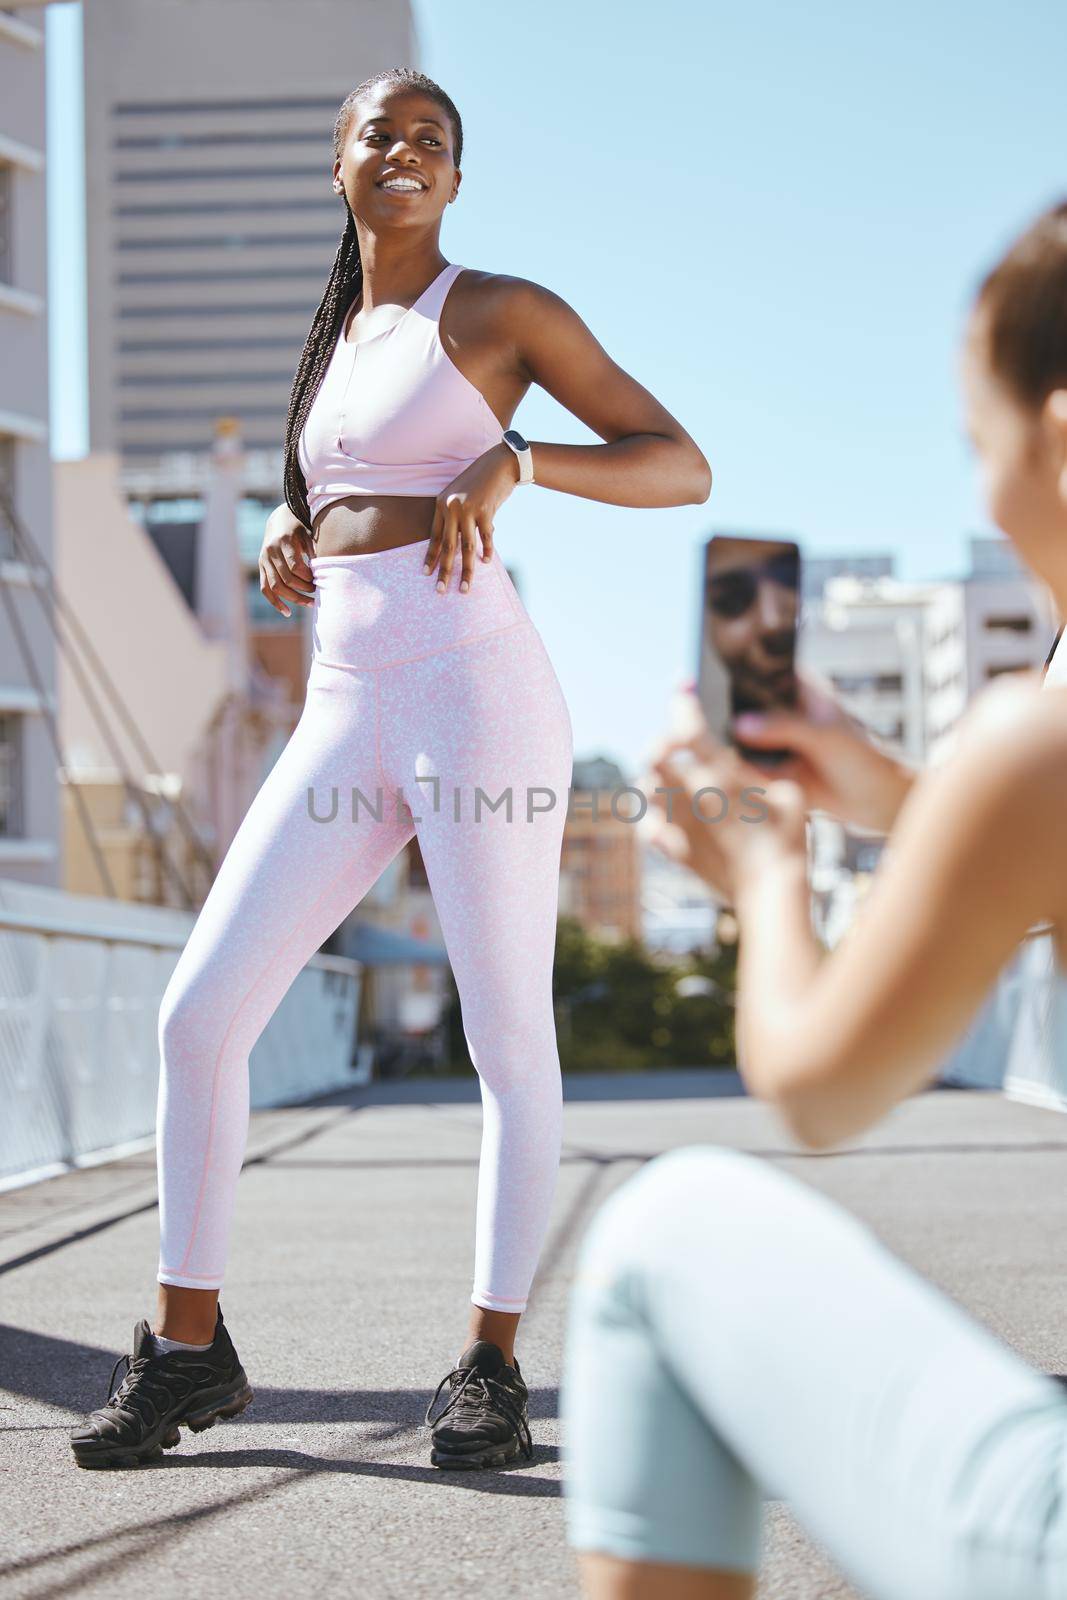 Fitness influencer friends with smartphone photo for social media update on wellness lifestyle and body progress results. Gen z marketing girl taking photo of black woman for sports fashion website.